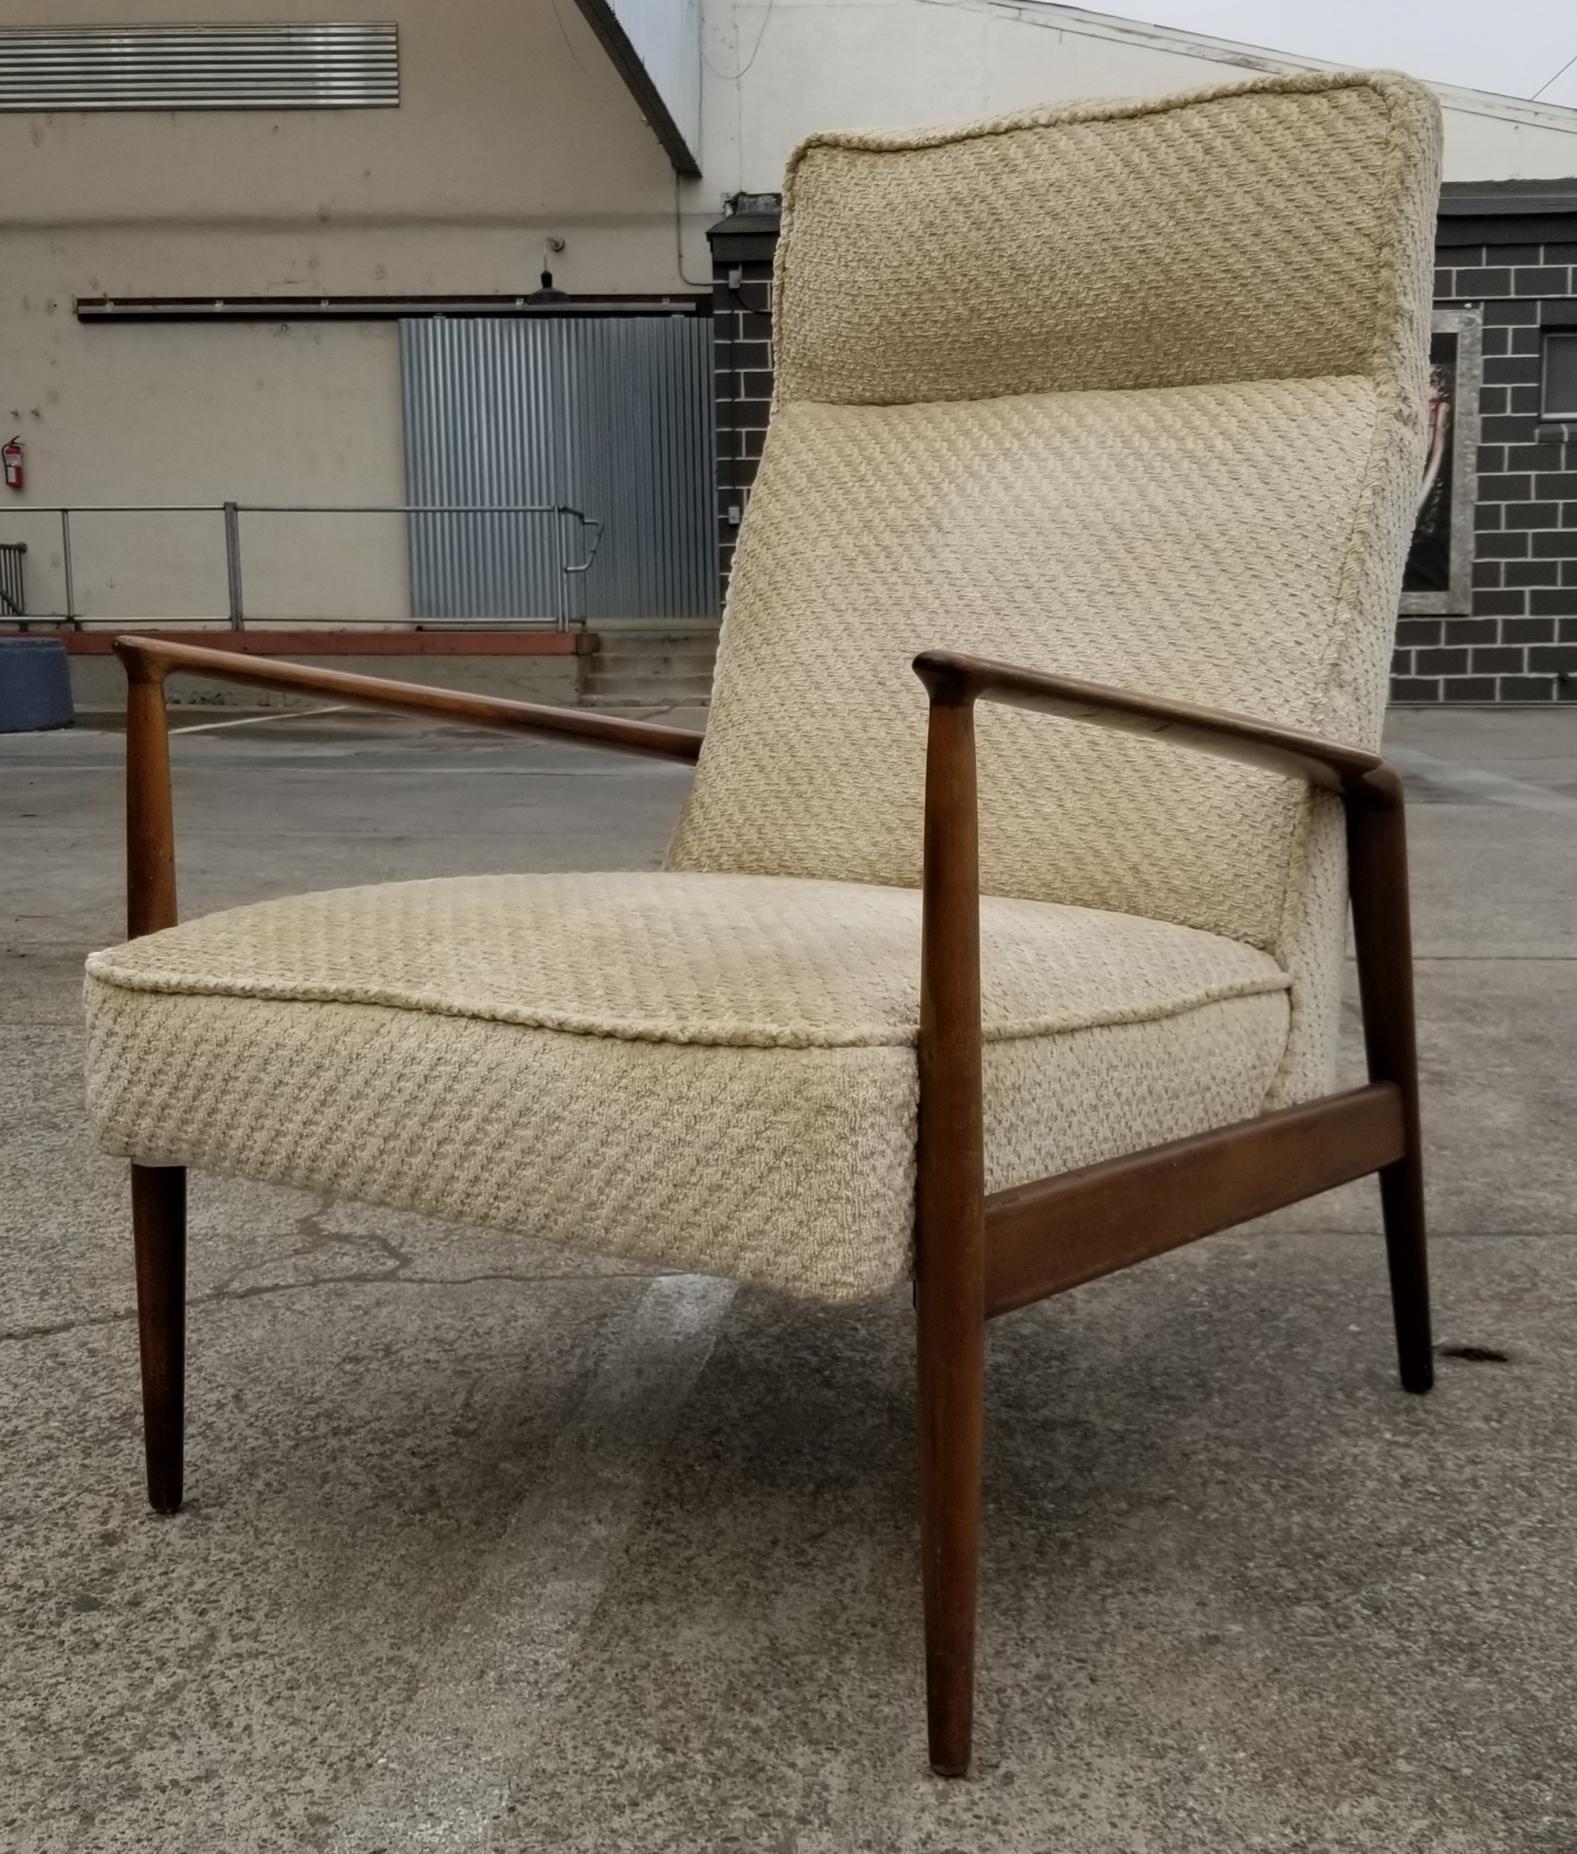 Danish modern high back lounge chair by Ib Kofod-Larsen, Denmark, circa 1960s. Original finish to beech wood frame. Older re-upholster has fading, foam is good, therefore, could be enjoyed as found, but new upholster recommended.

Ib